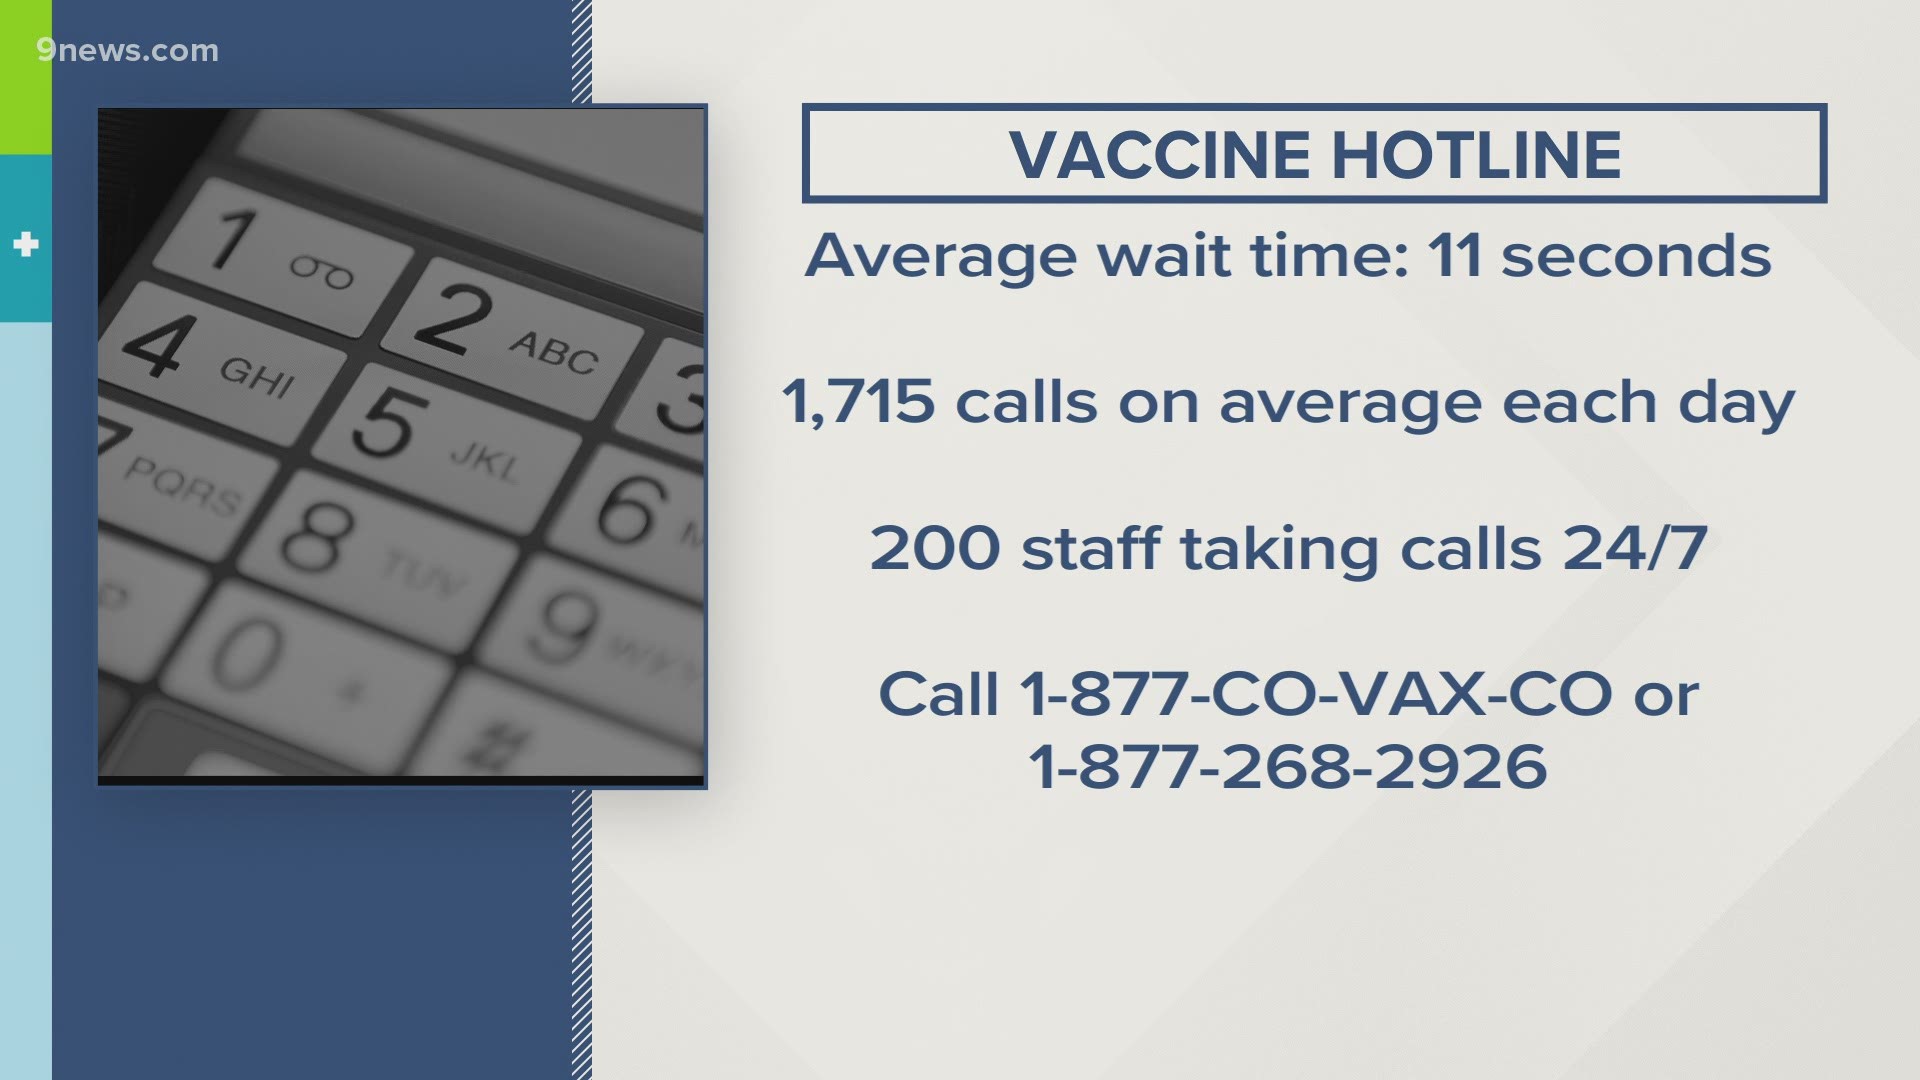 The hotline opened about two weeks ago to super long waits. Now the state says callers are only waiting for 11 seconds on average.